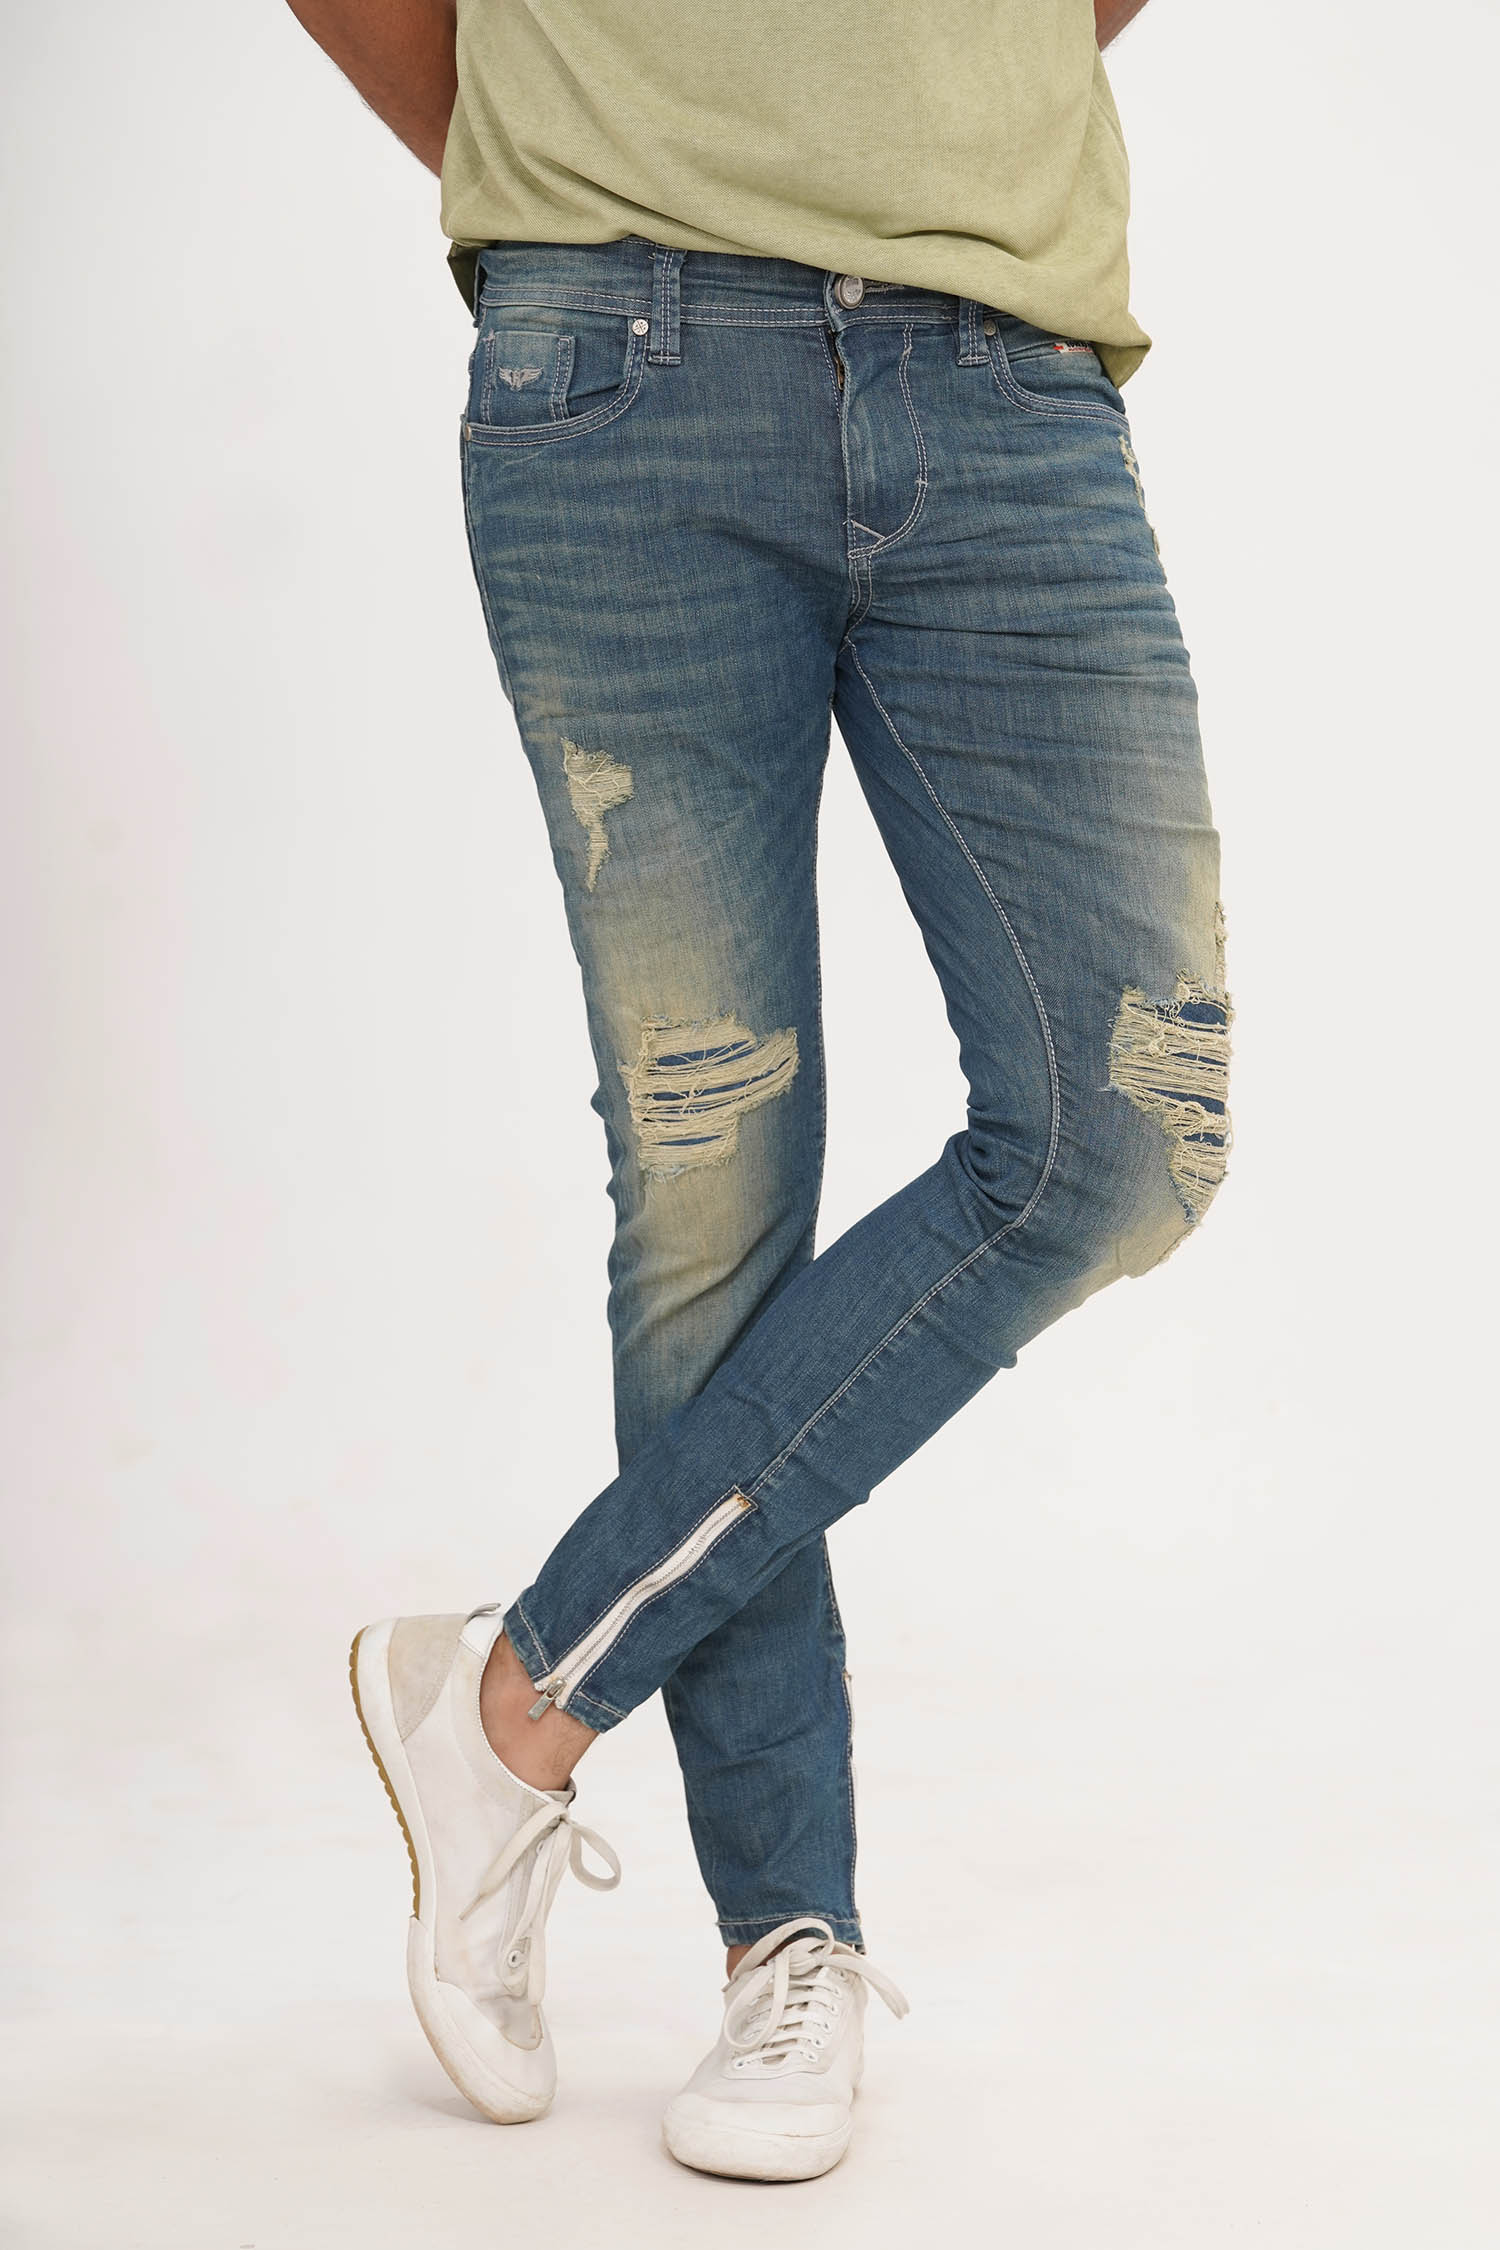 ankle type jeans